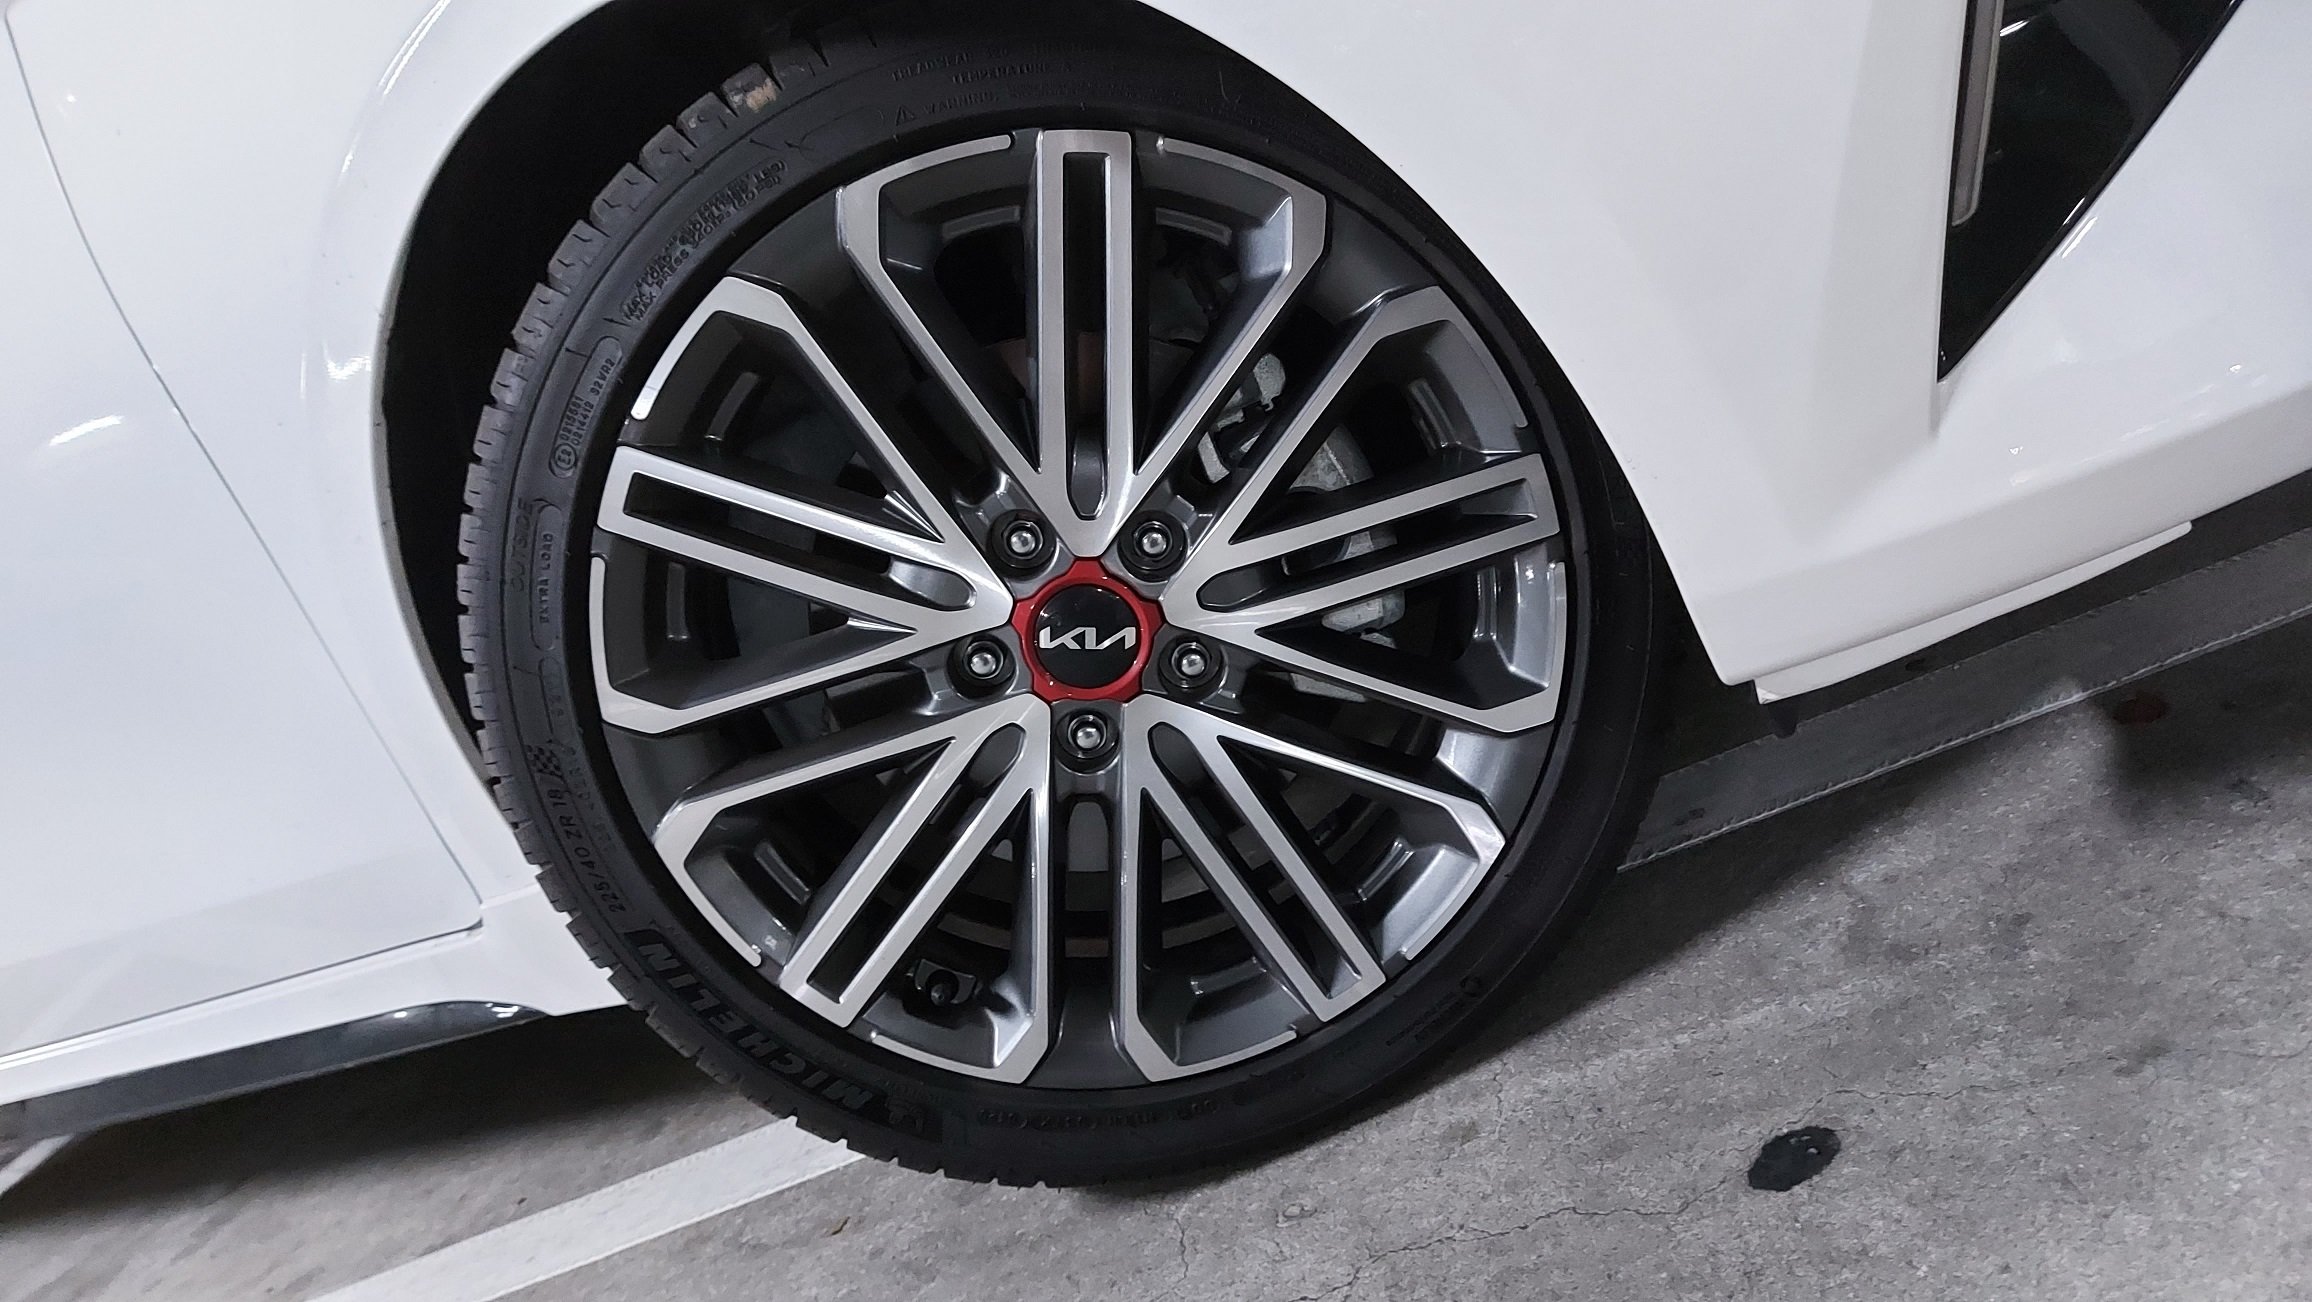 18-inch alloys + Michelin tyres don't thump over bumps like you'd expect.